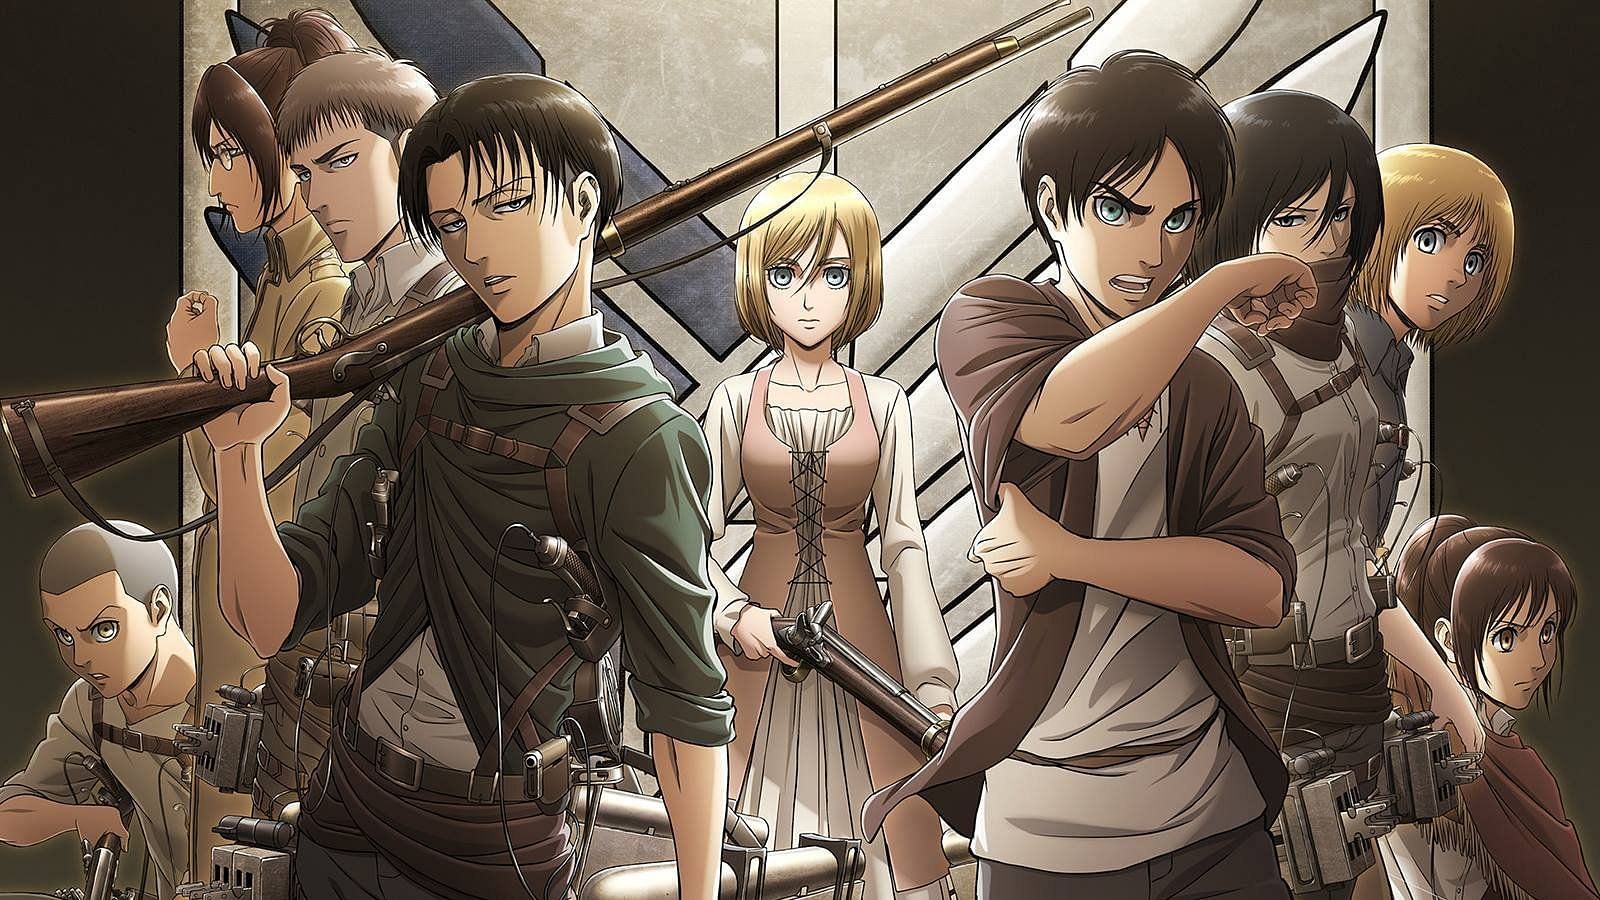 7 underlying themes in the Attack on Titan universe